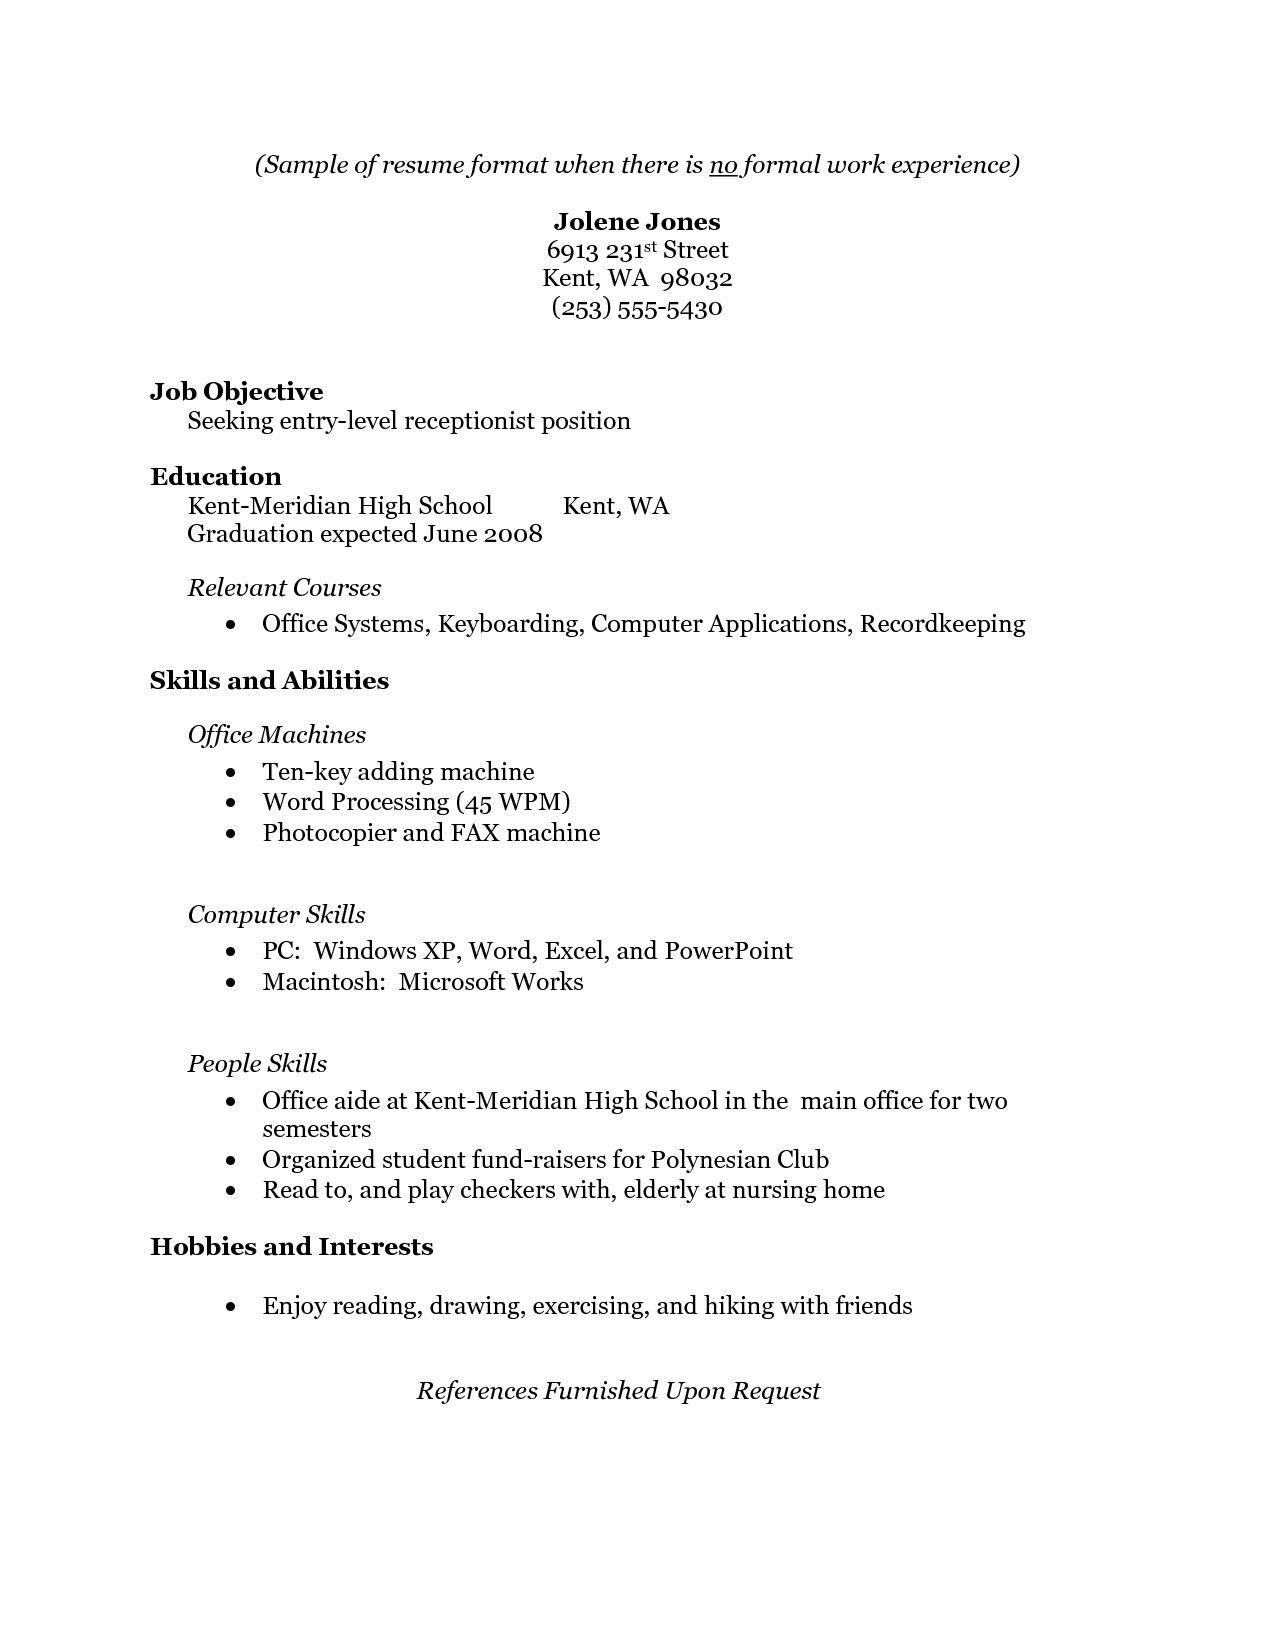 Resume Templates for Students with Little Experience Free Resume Templates No Work Experience #experience …